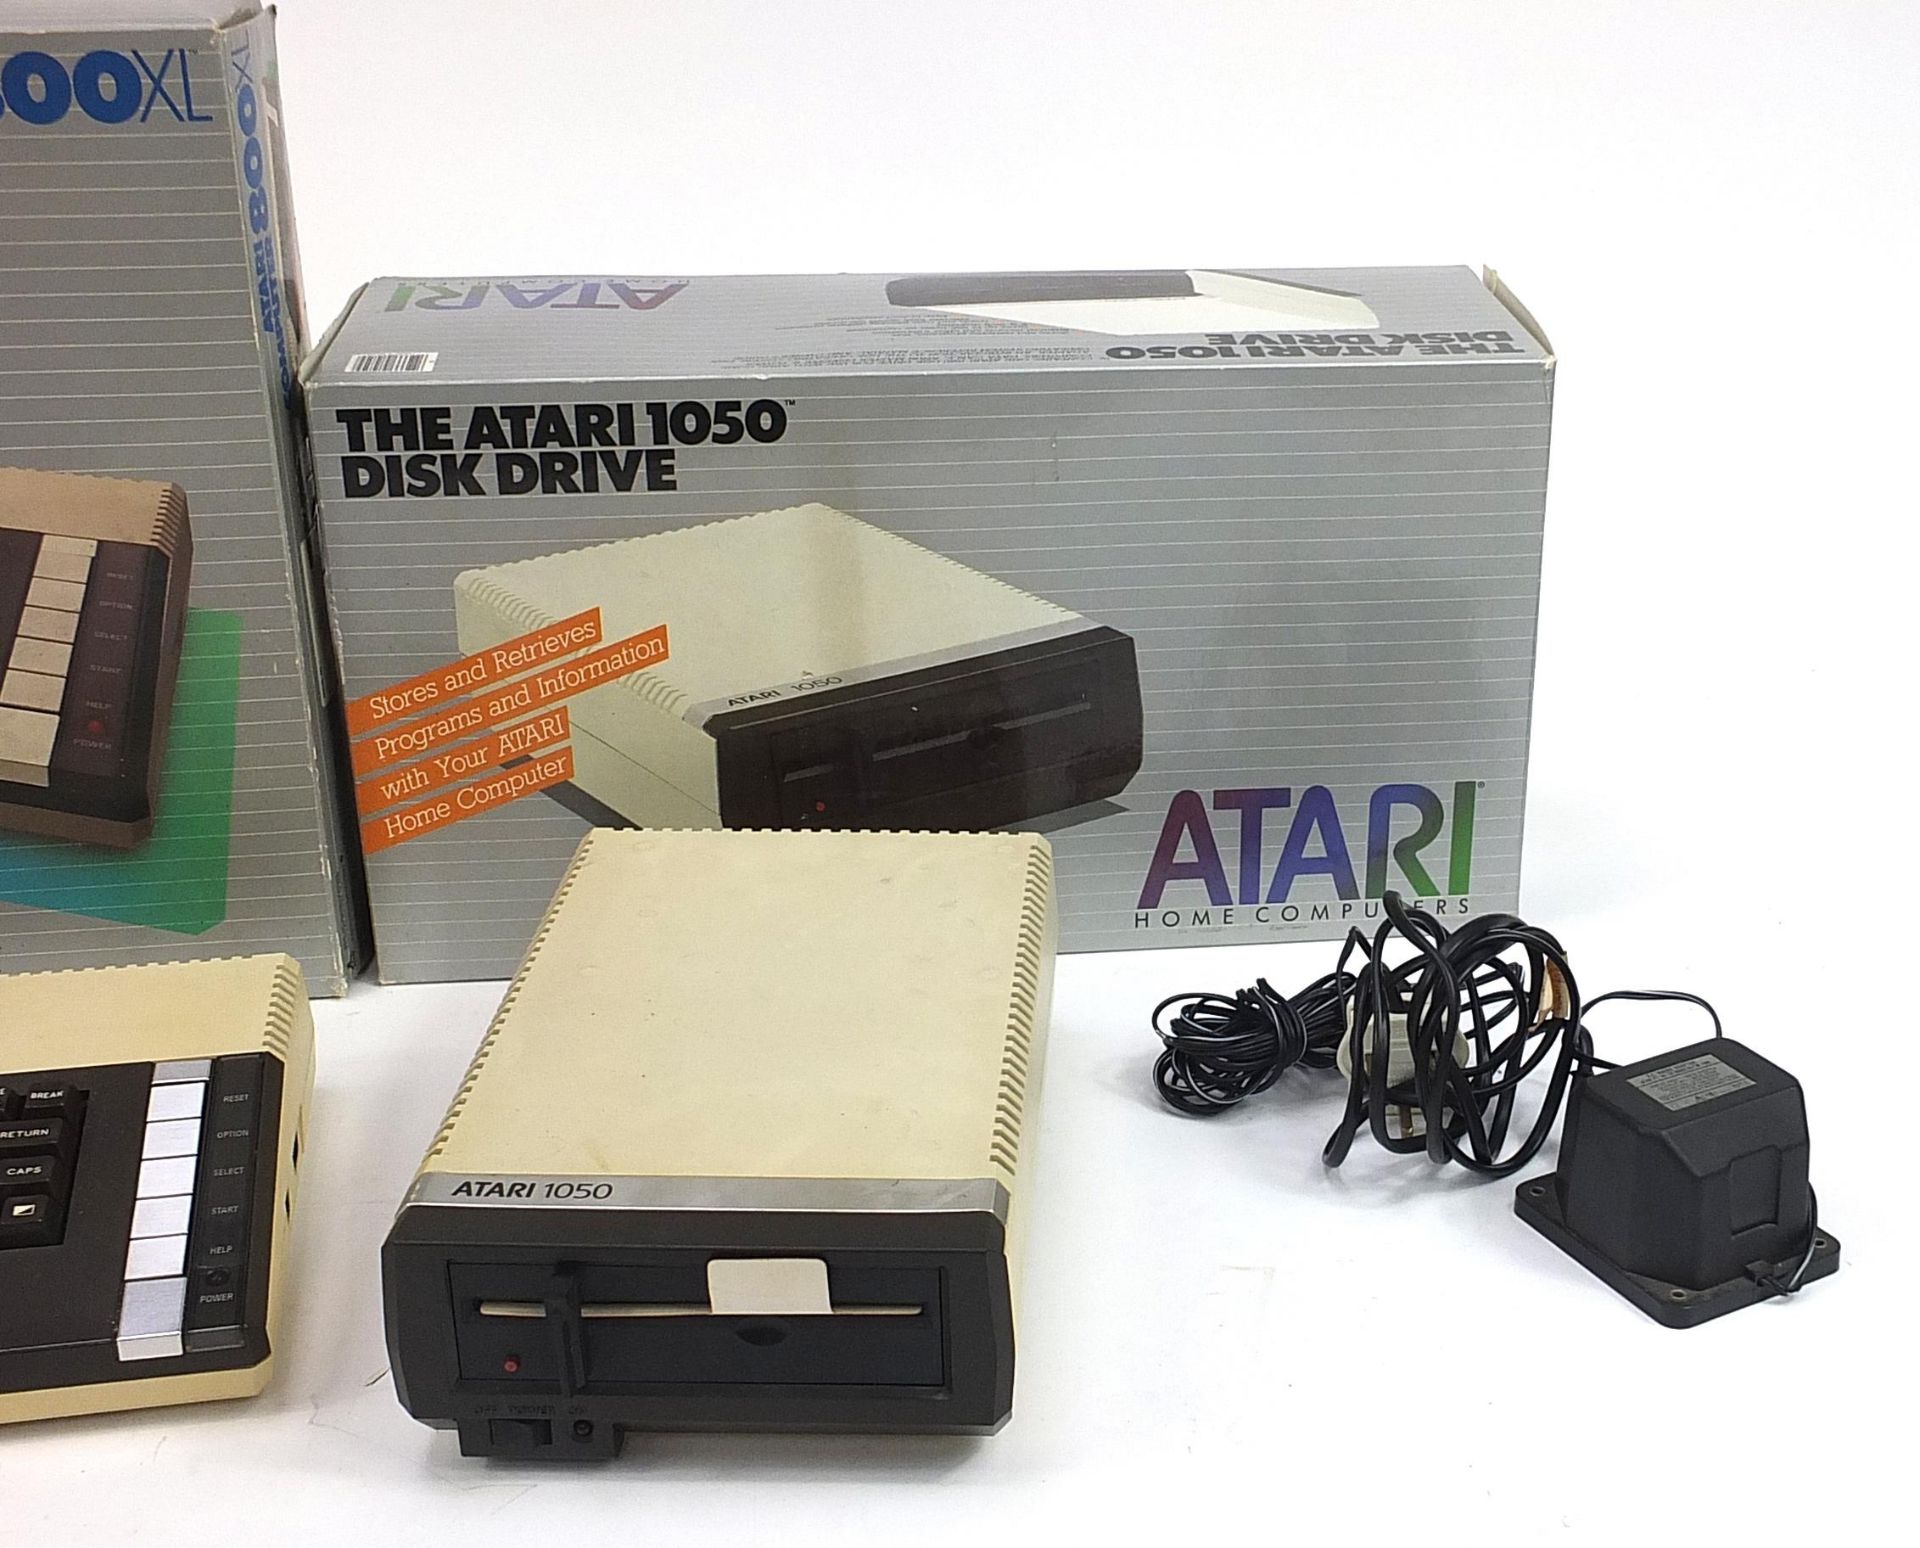 Atari 800XL computer and 1050 disc drive with boxes - Image 3 of 3